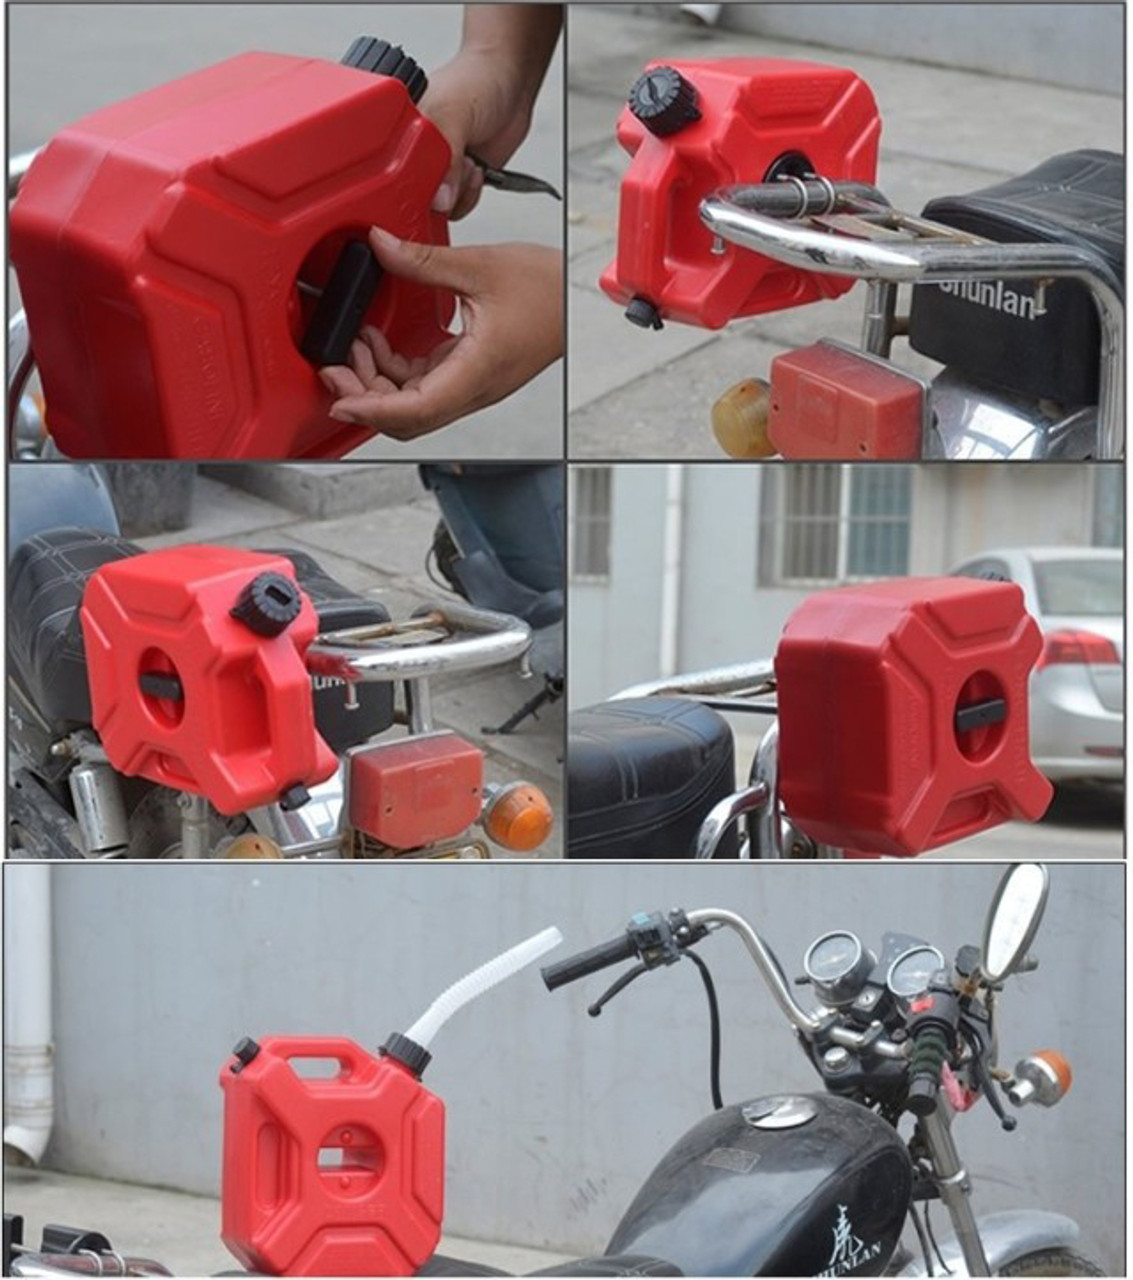 Motorcycle 5L Plastic Jerry Cans Gas Diesel Fuel Tank w/ Lock SUV ATV Scooter